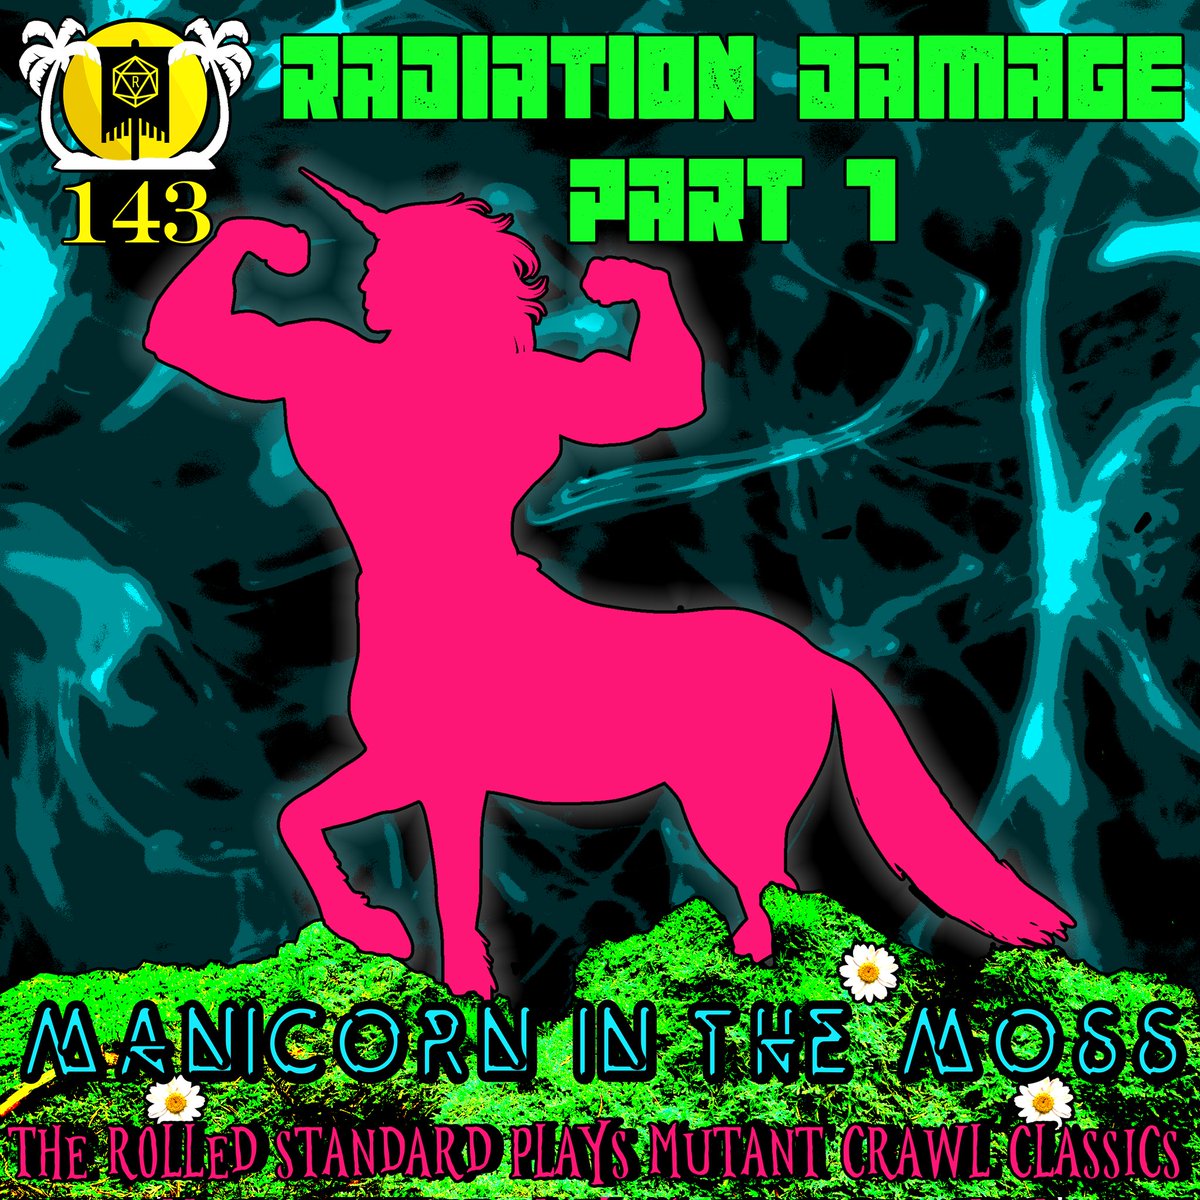 THIS FRIDAY!
We return to finish what we started with Radiation Damage Pt 7: Manicorn in the Moss as we continue to play Mutant Crawl Classics.
The fledgling Seekers finally make it to the Chosen Zuu kingdom of Cortexin to 'seek' an audience with King Kabayo.